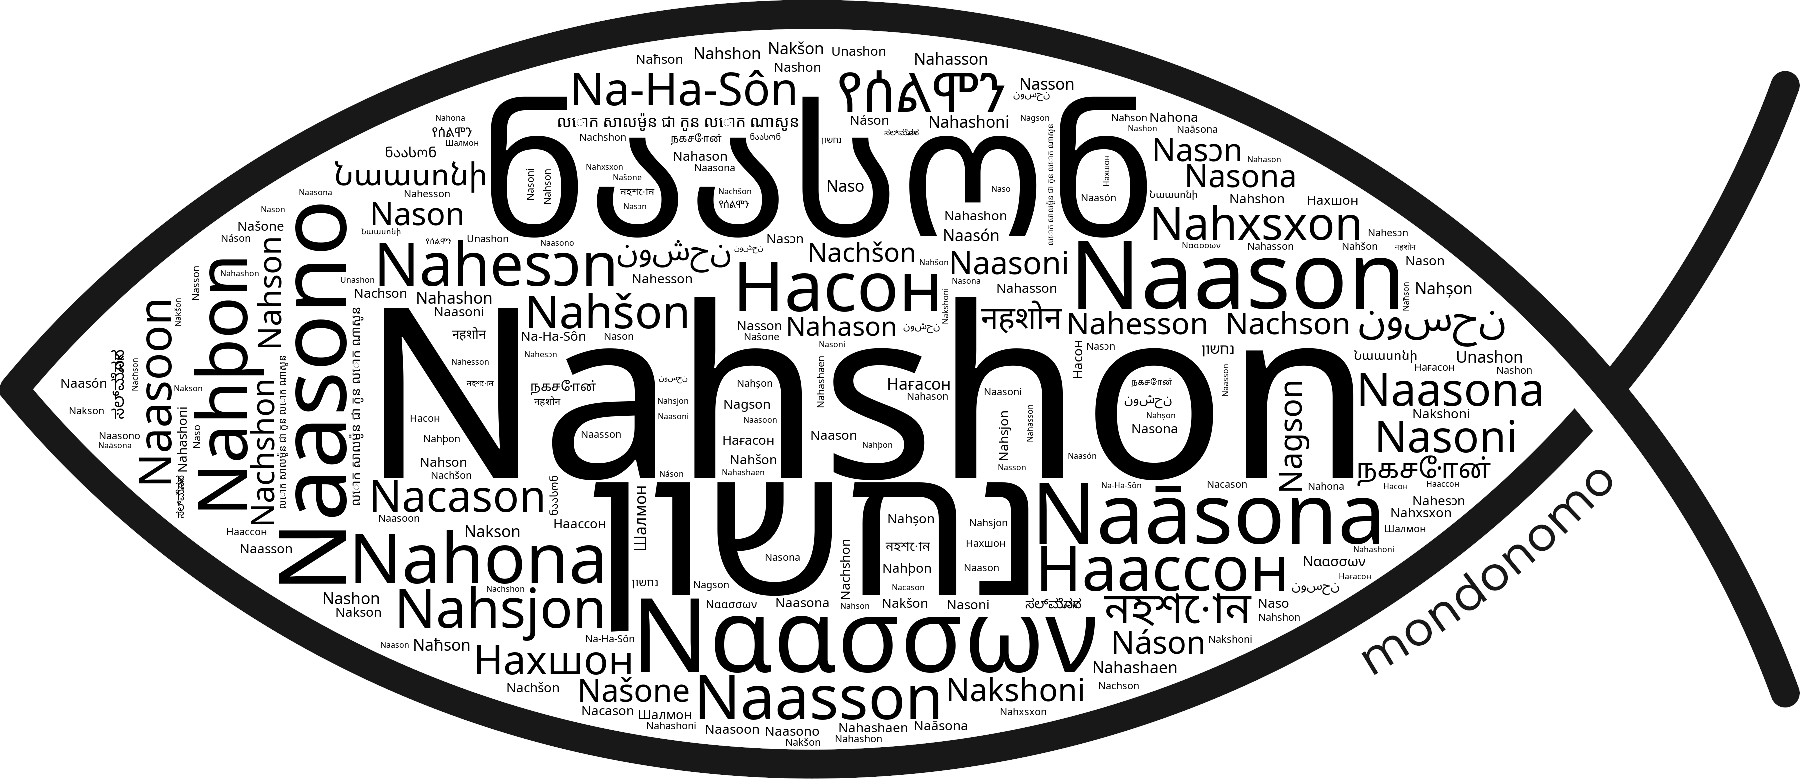 Name Nahshon in the world's Bibles